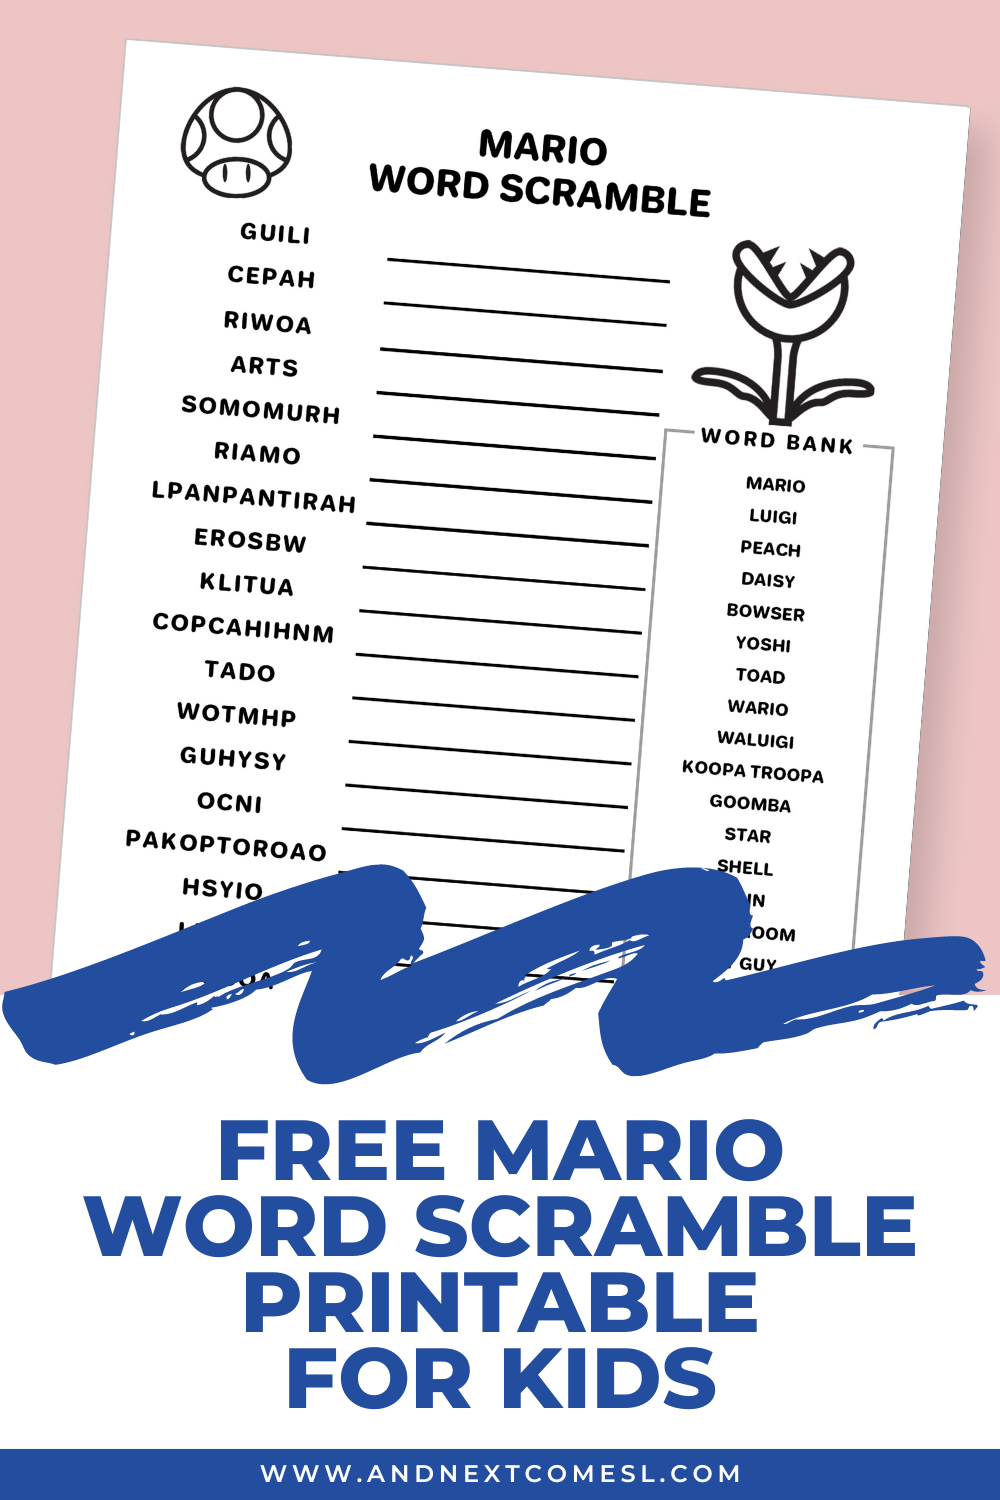 Looking for a quick Mario activity? This free printable Mario world scramble game is perfect for kids of all ages.